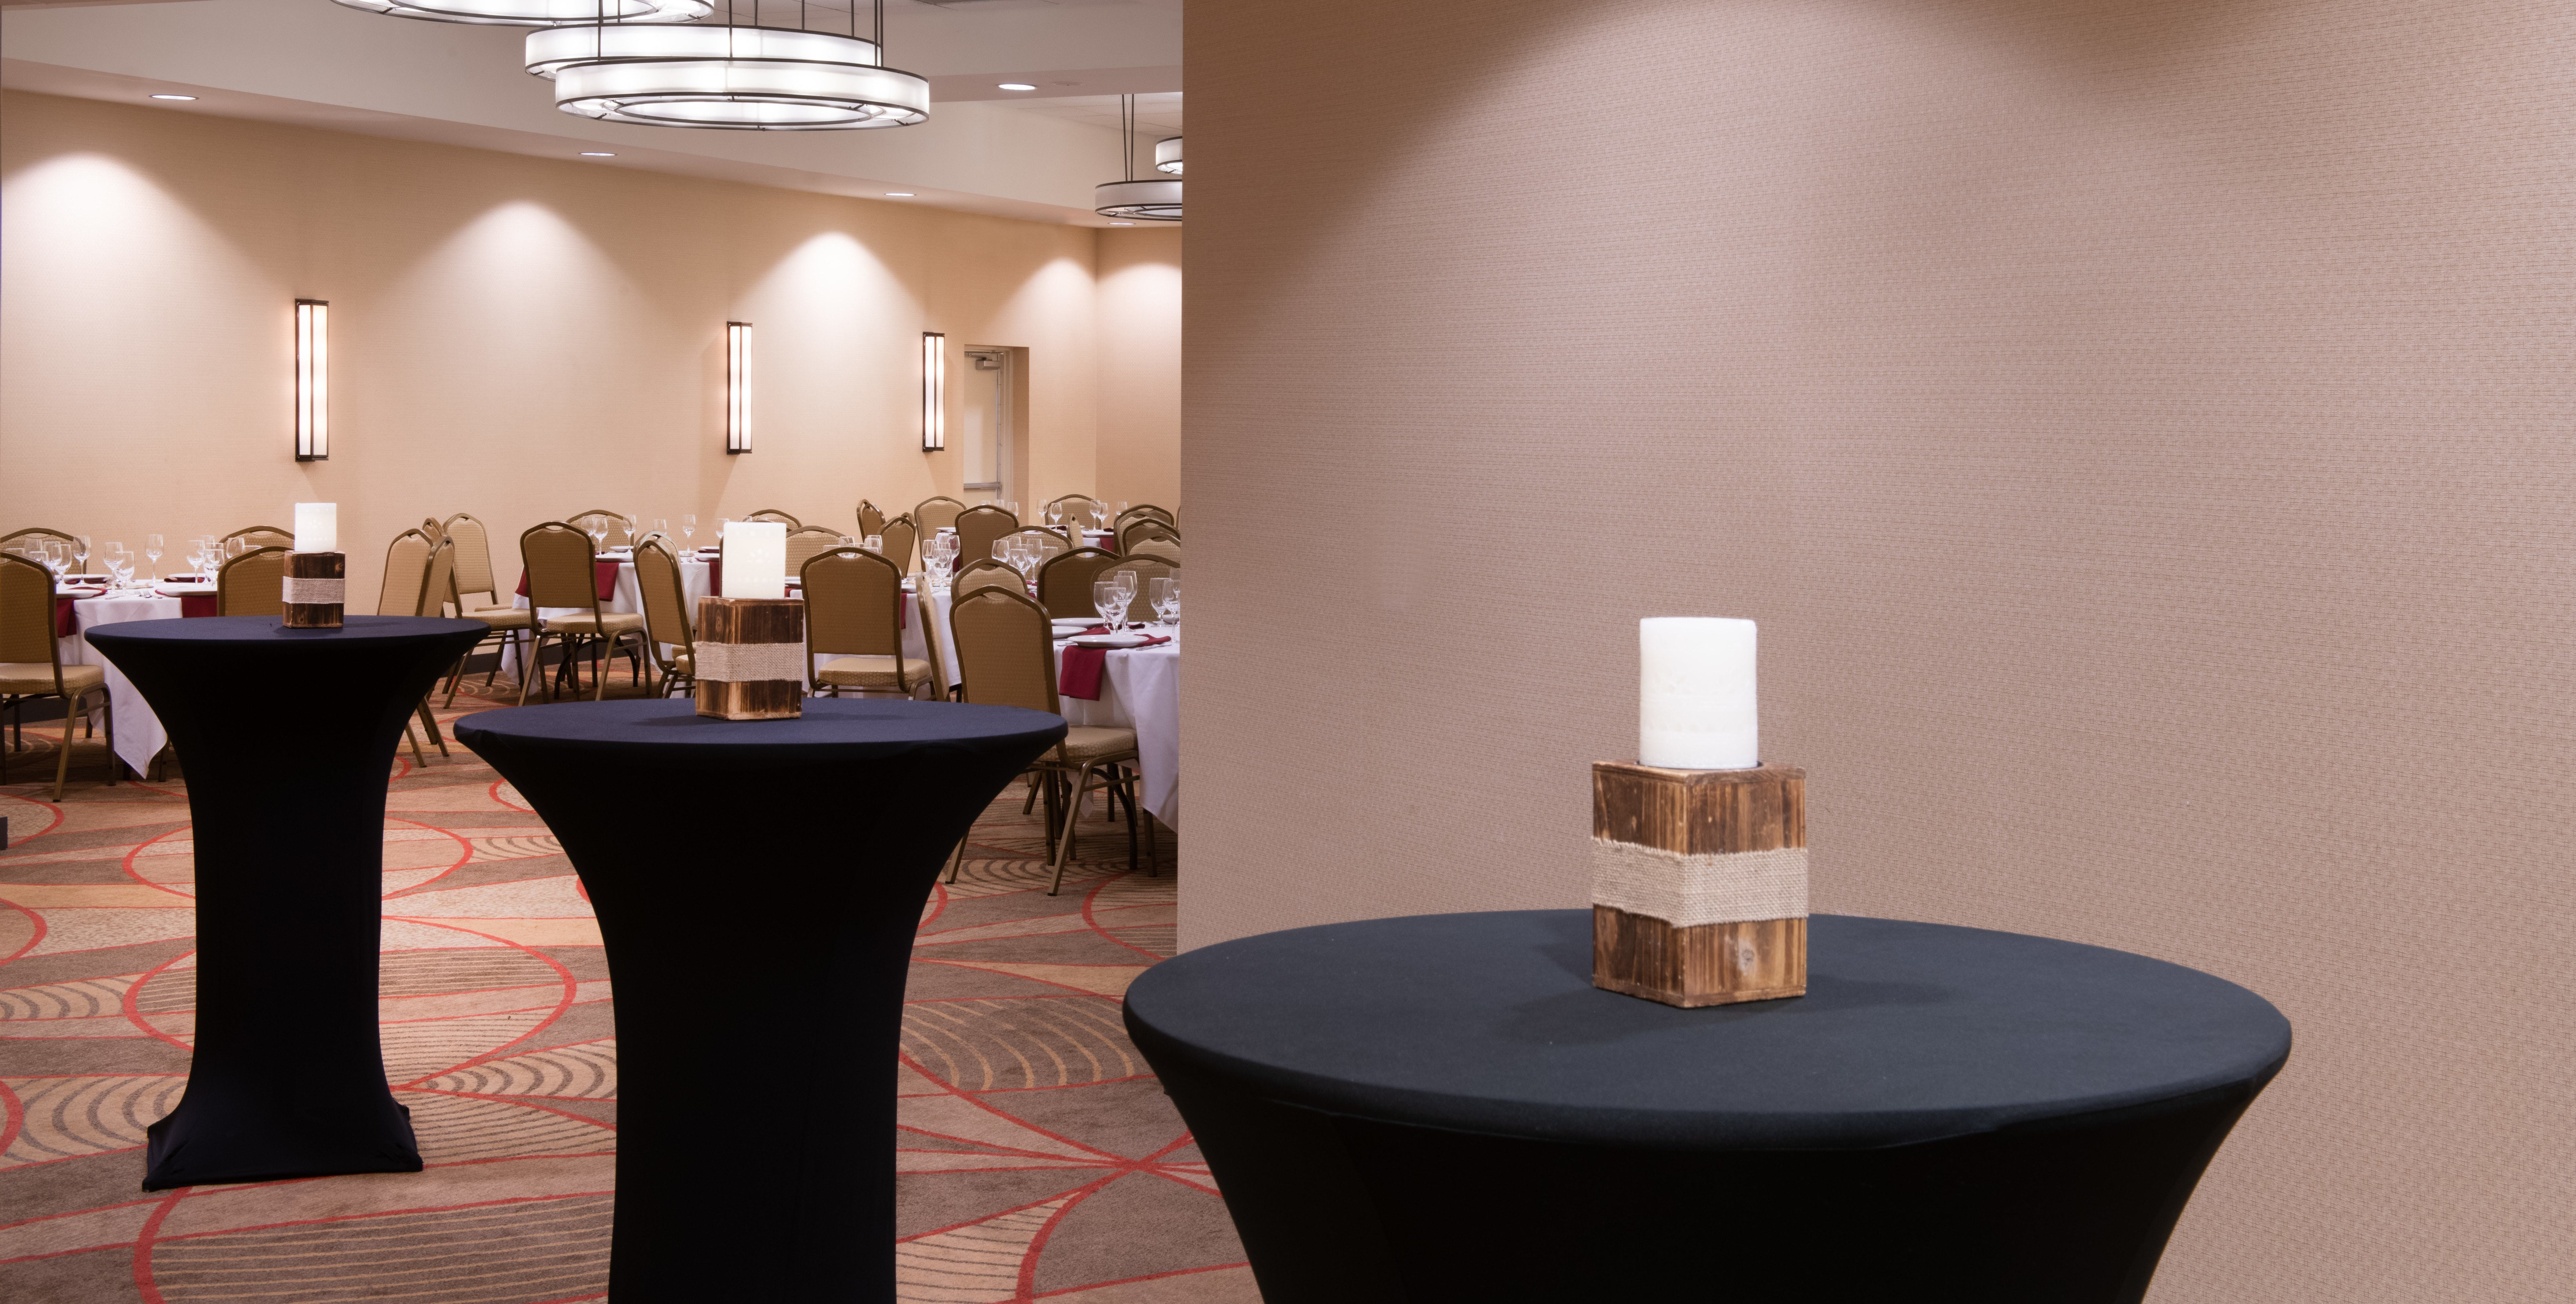 Standing Cocktail Tables in Meeting Room